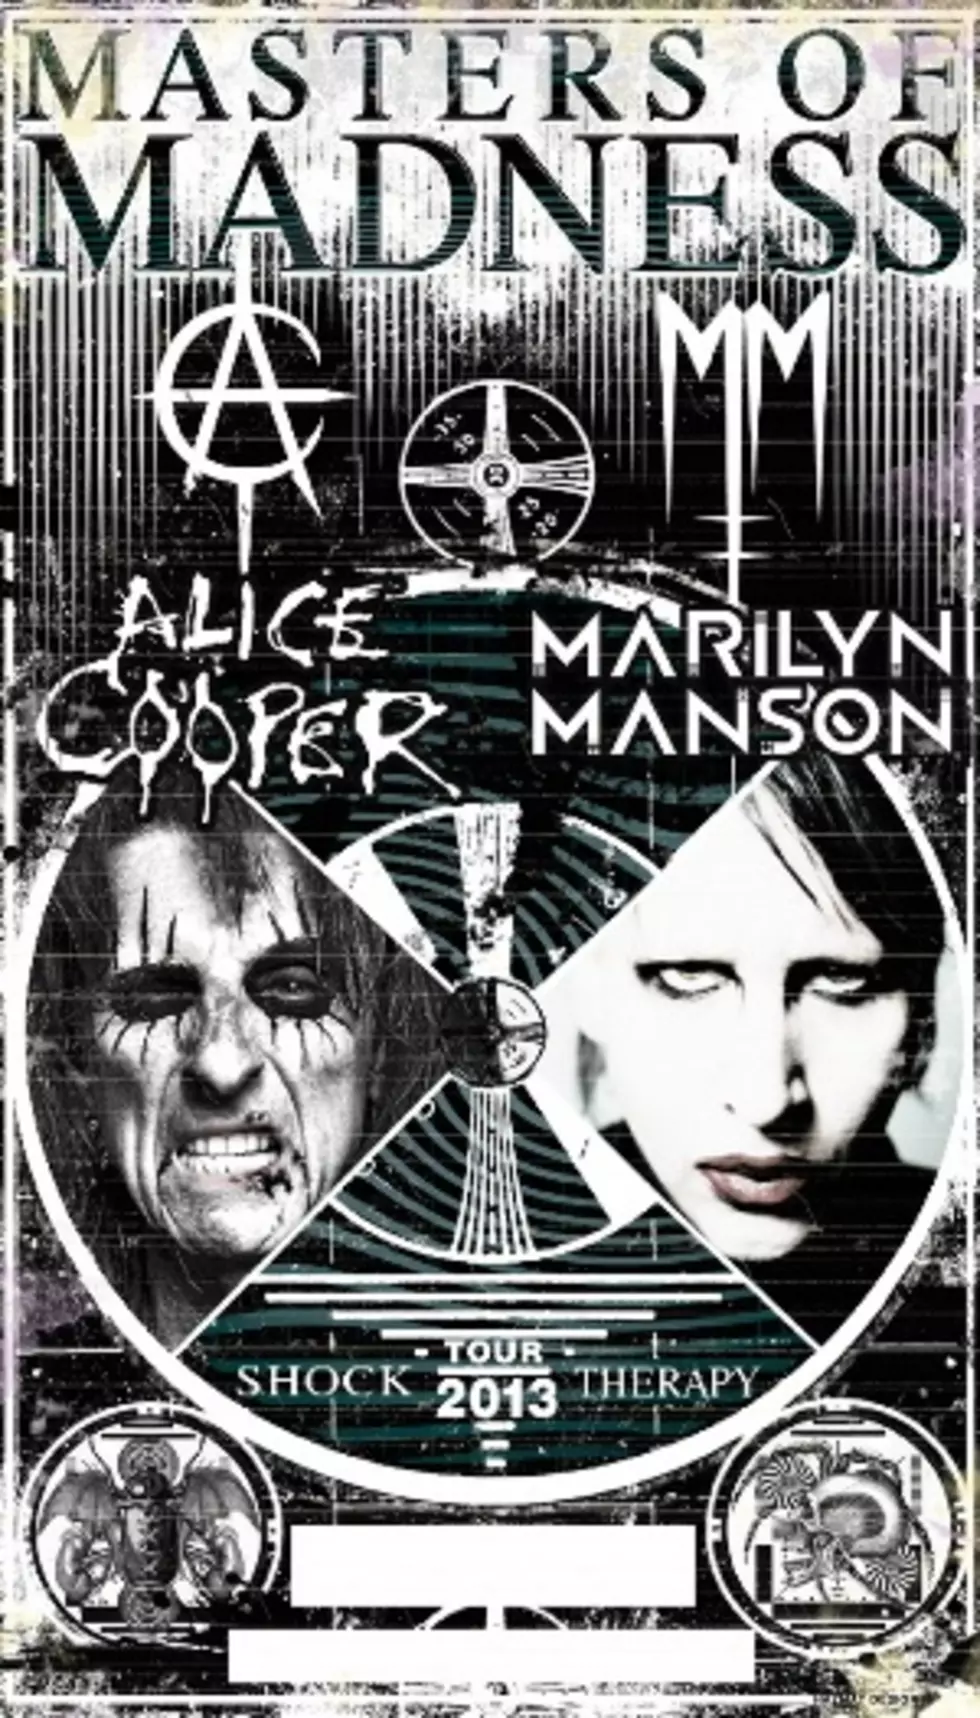 Alice Cooper and Marilyn Manson Announce 2013 Tour